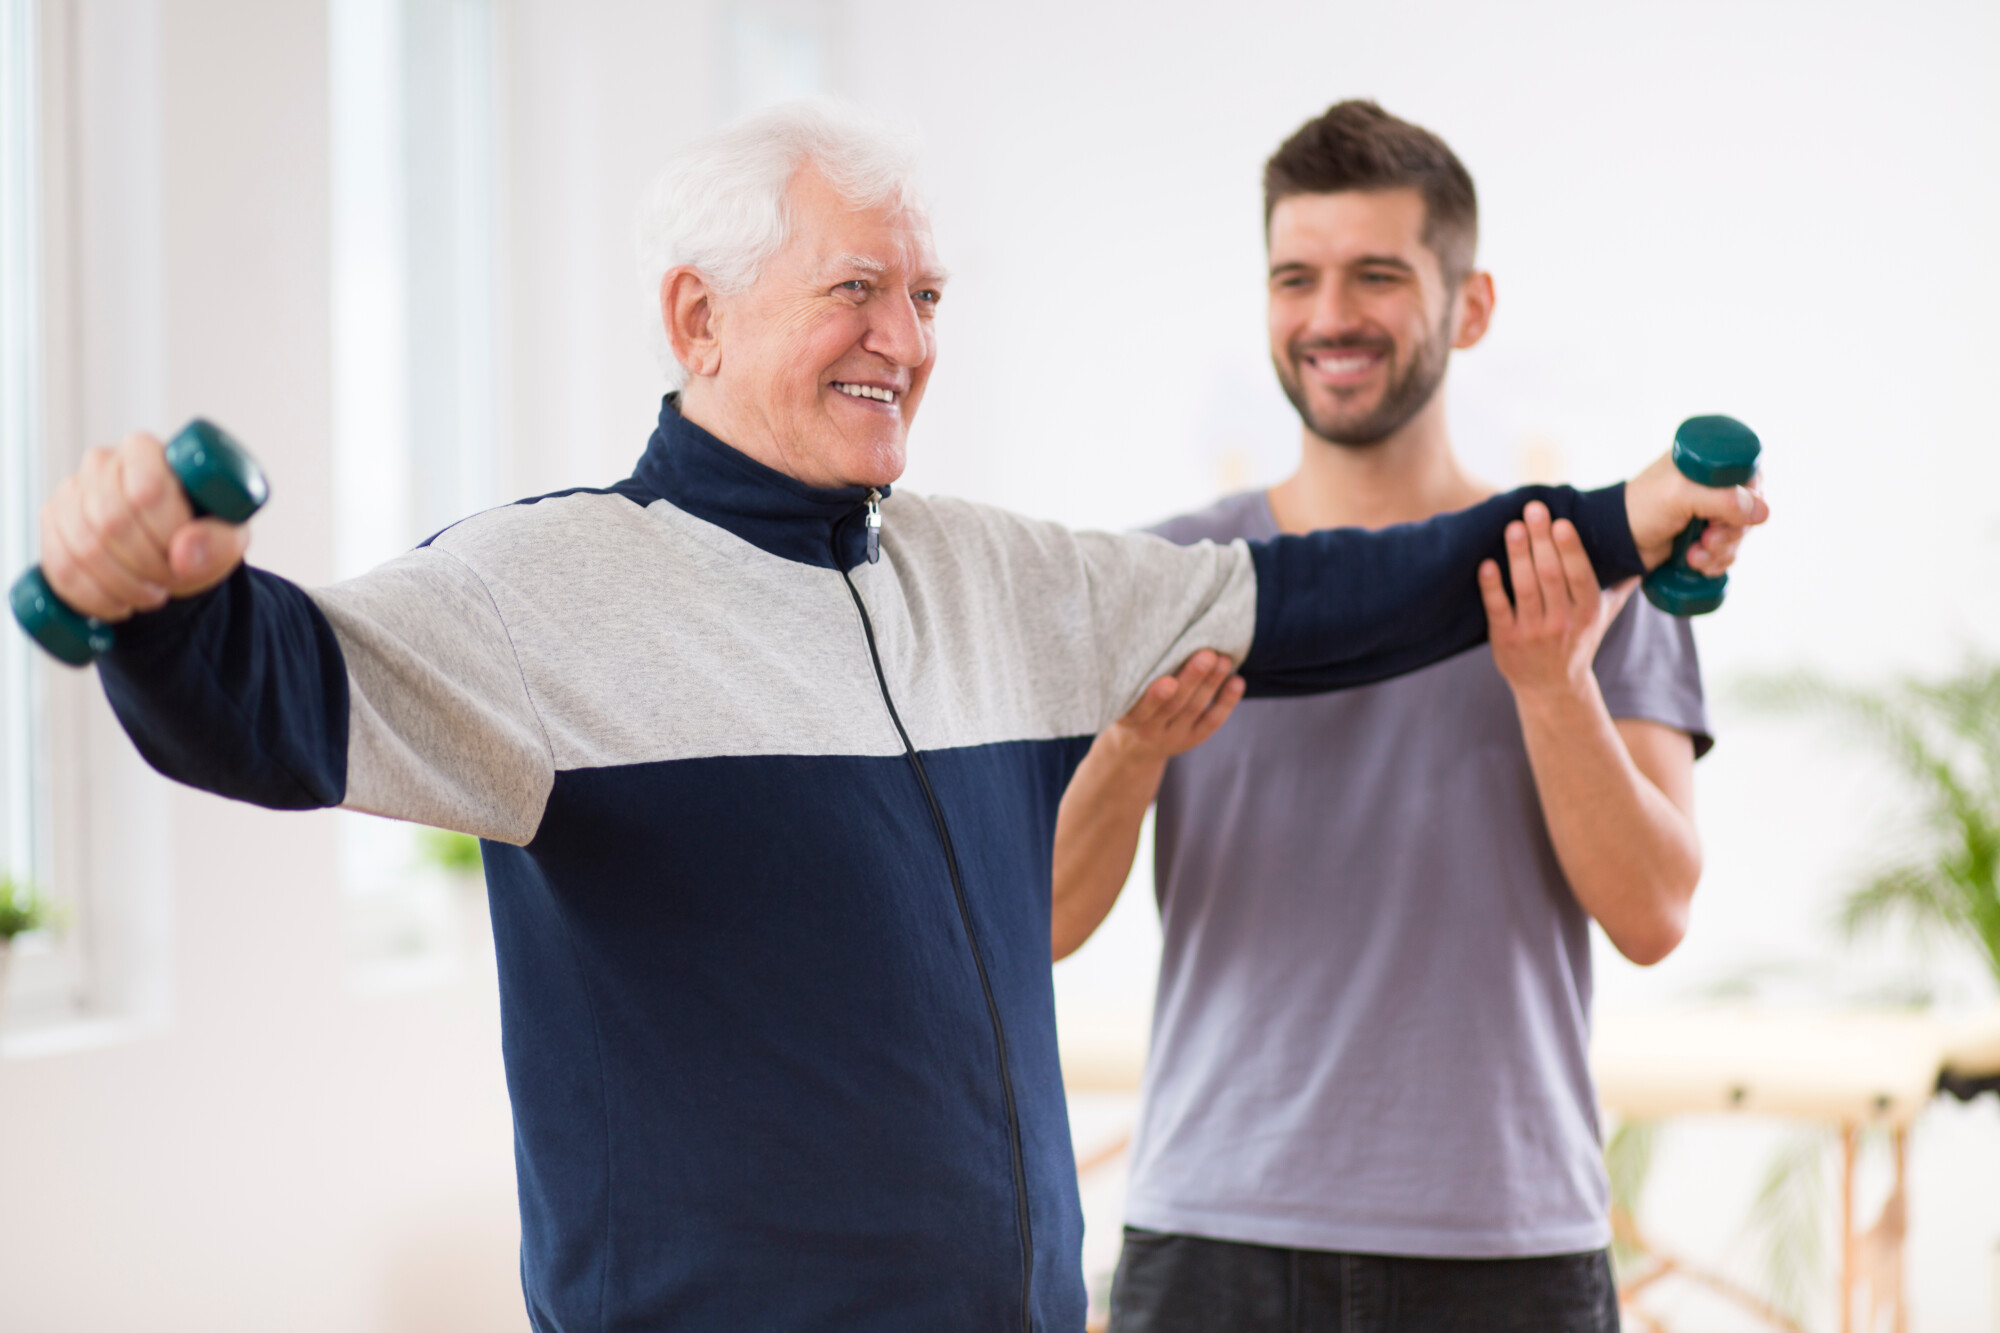 If you have a senior relative who is trying to get into shape, this guide can help. Here are the top five home exercises for seniors to try in 2023.